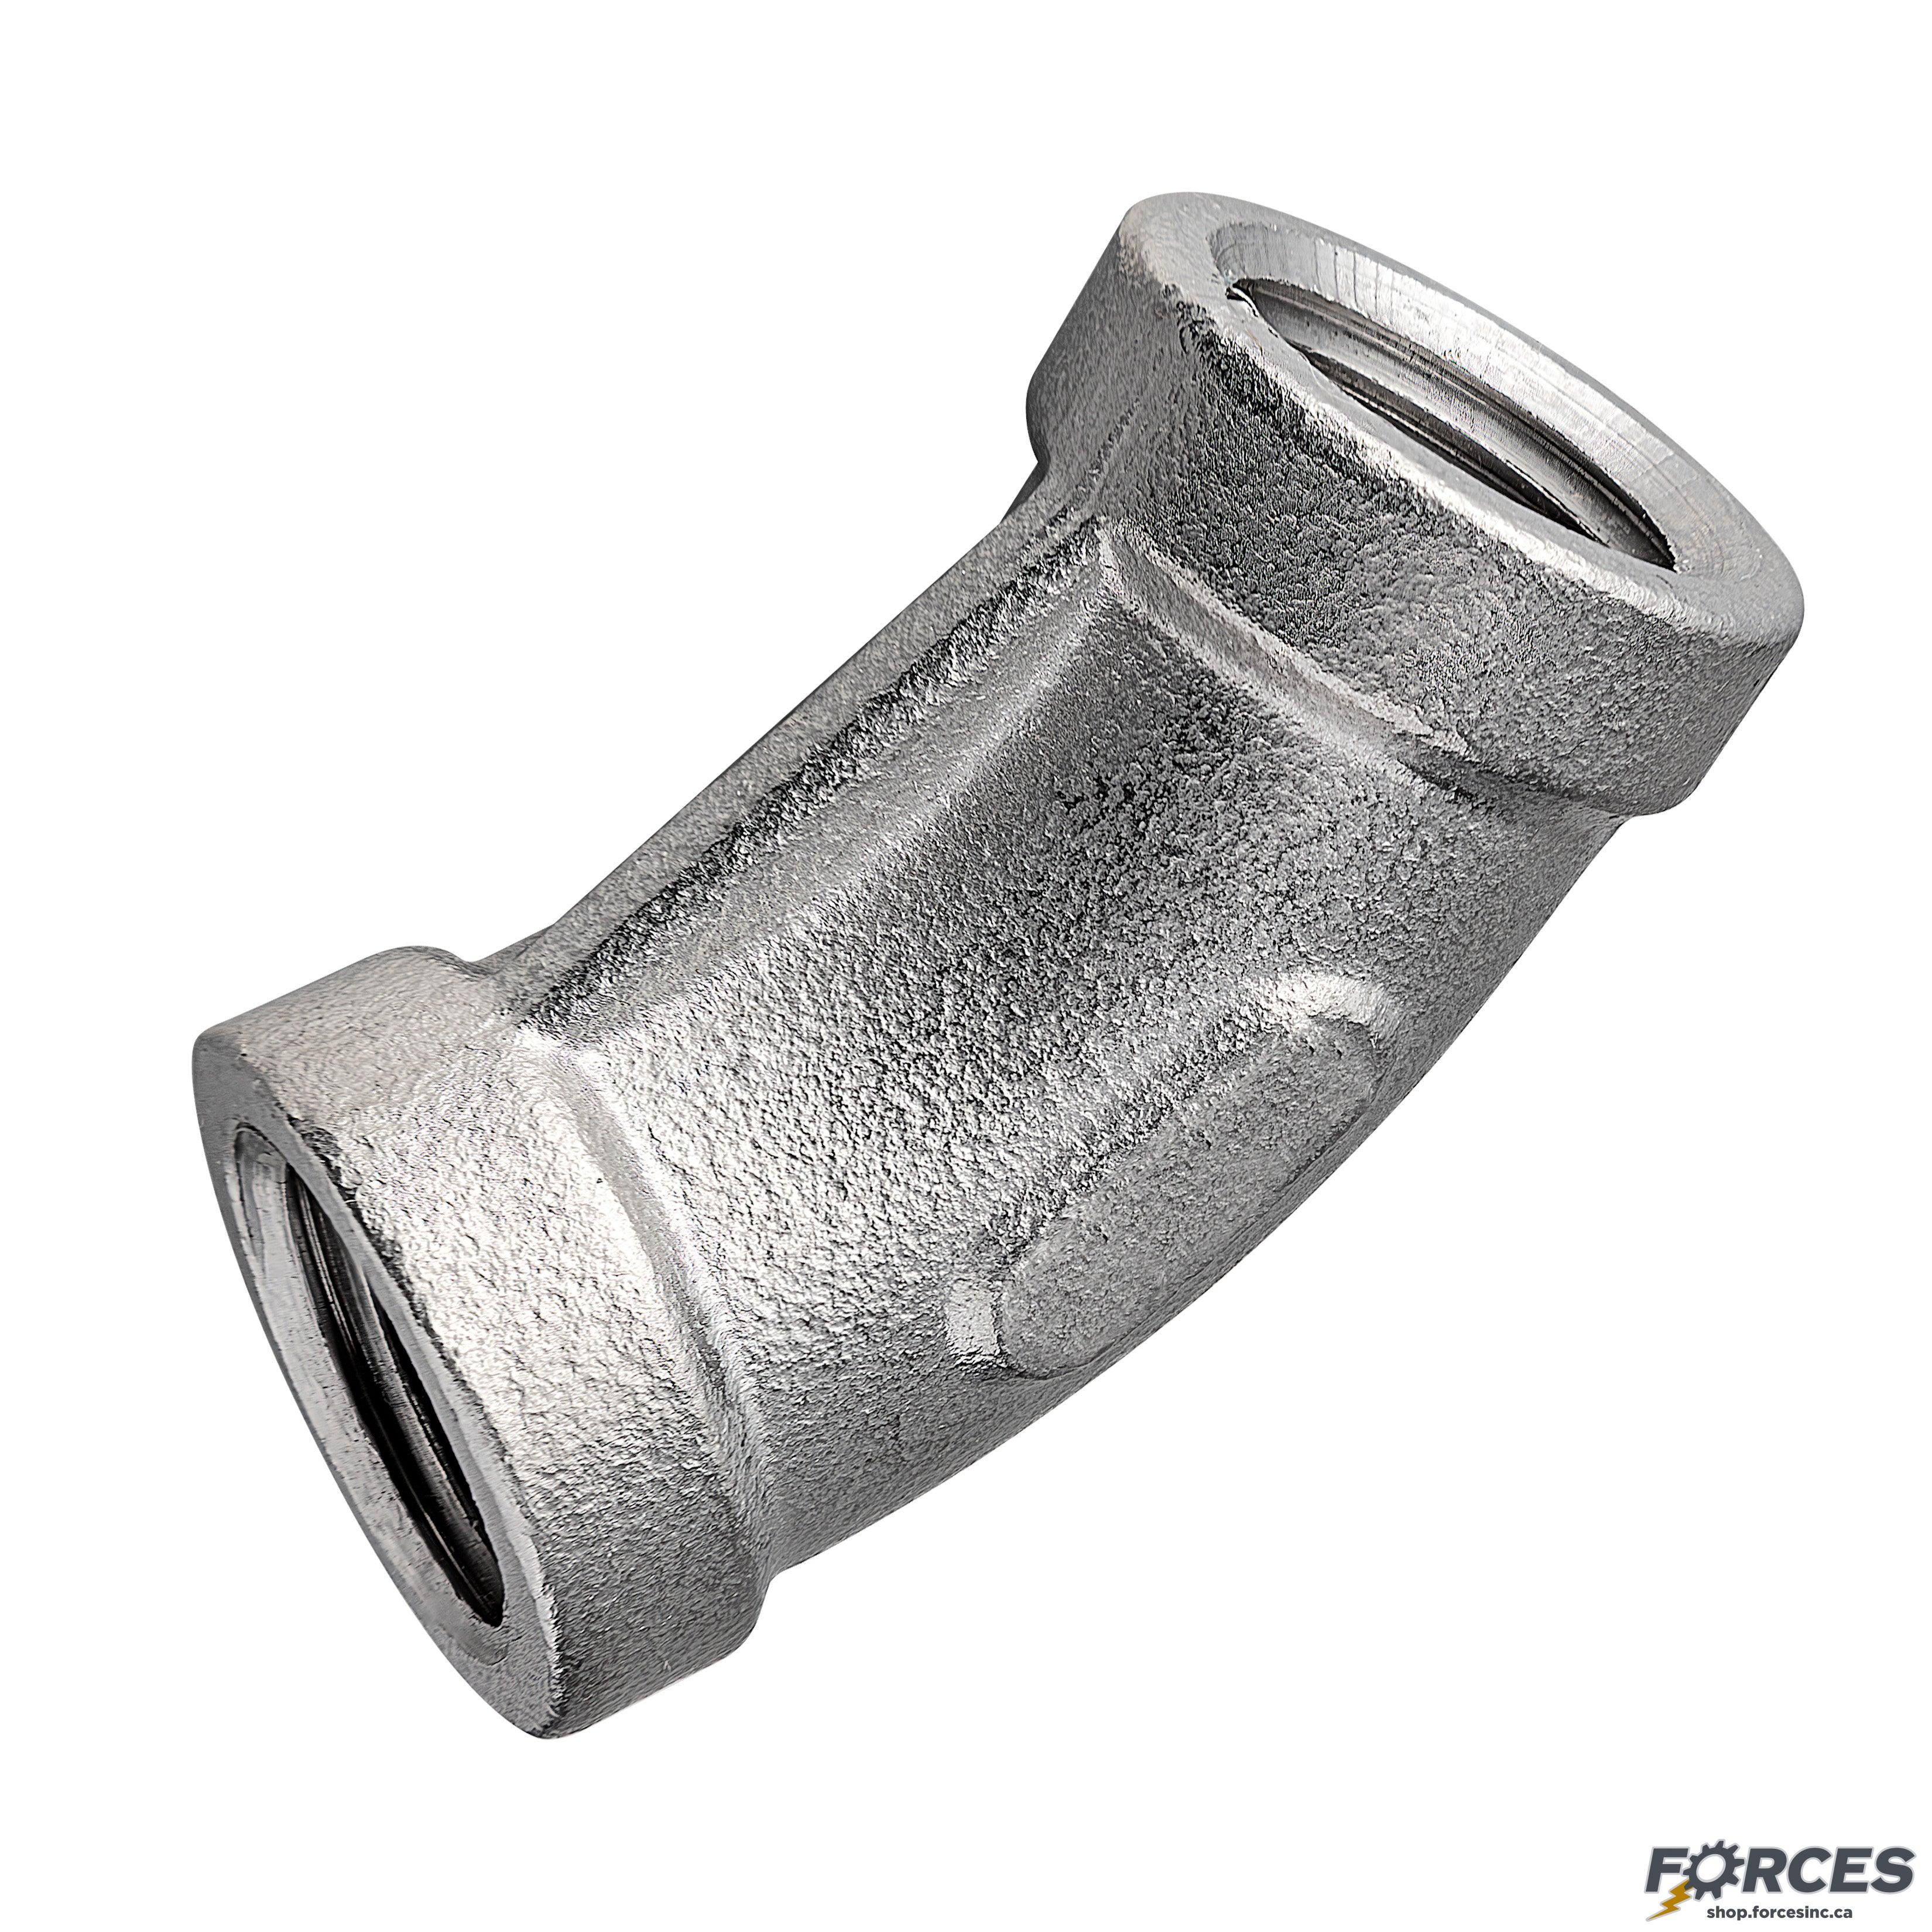 1-1/4" Elbow 45° NPT #150 - Stainless Steel 316 - Forces Inc